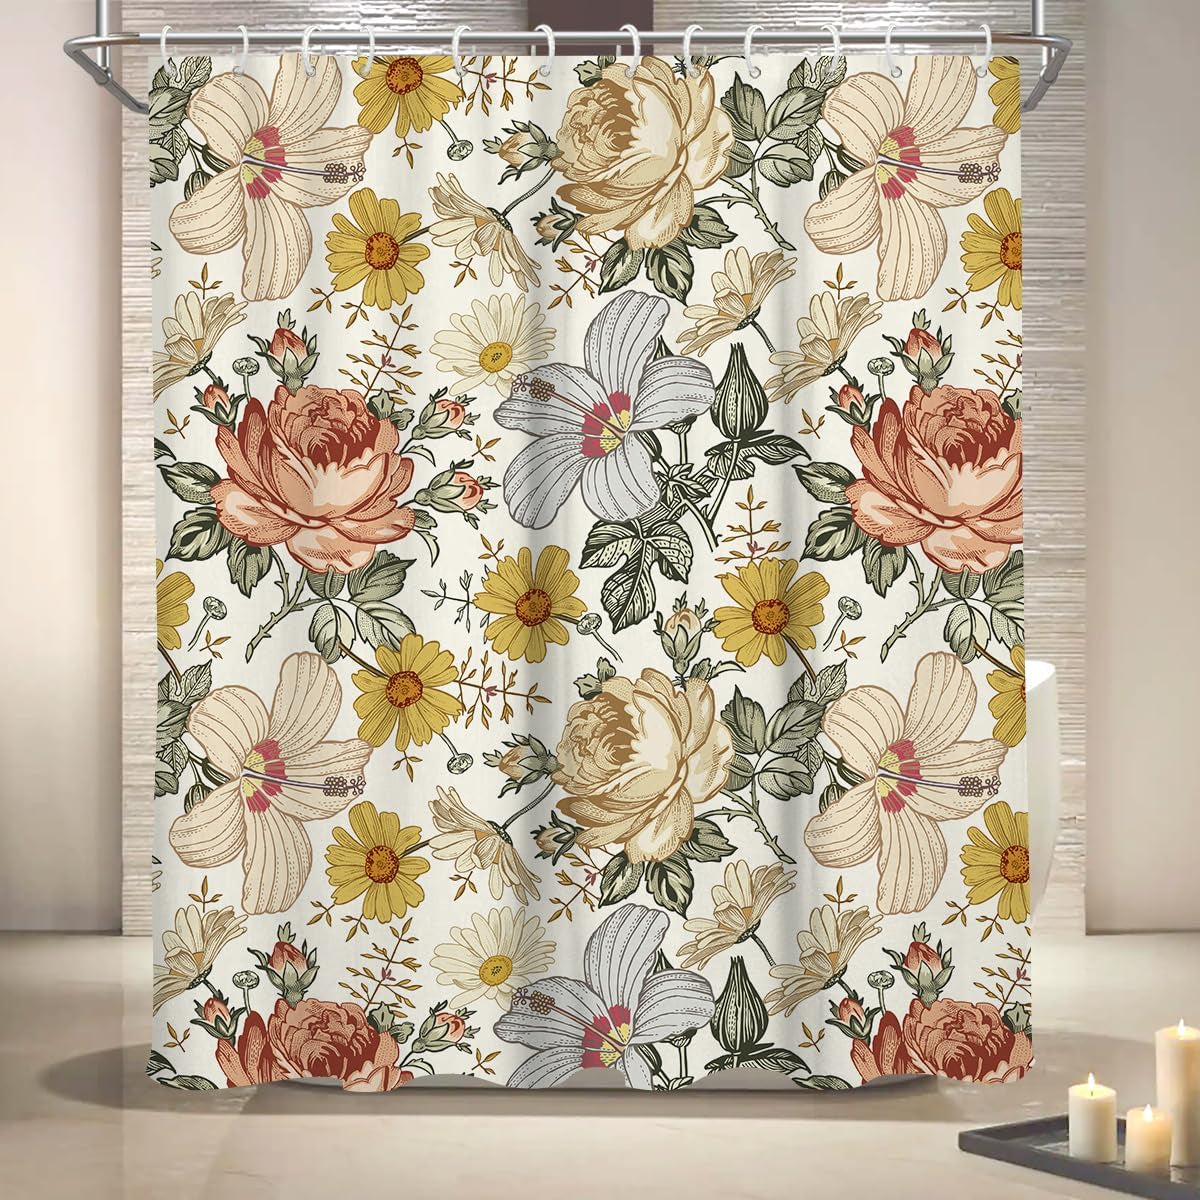 Coxila Floral Shower Curtain Vintage Flower Retro Plant Watercolor Dark Mustard Yellow Colorful Peony Pale Printed 60 X 72 Inch Polyester Fabric Waterproof 12 Pack Hooks